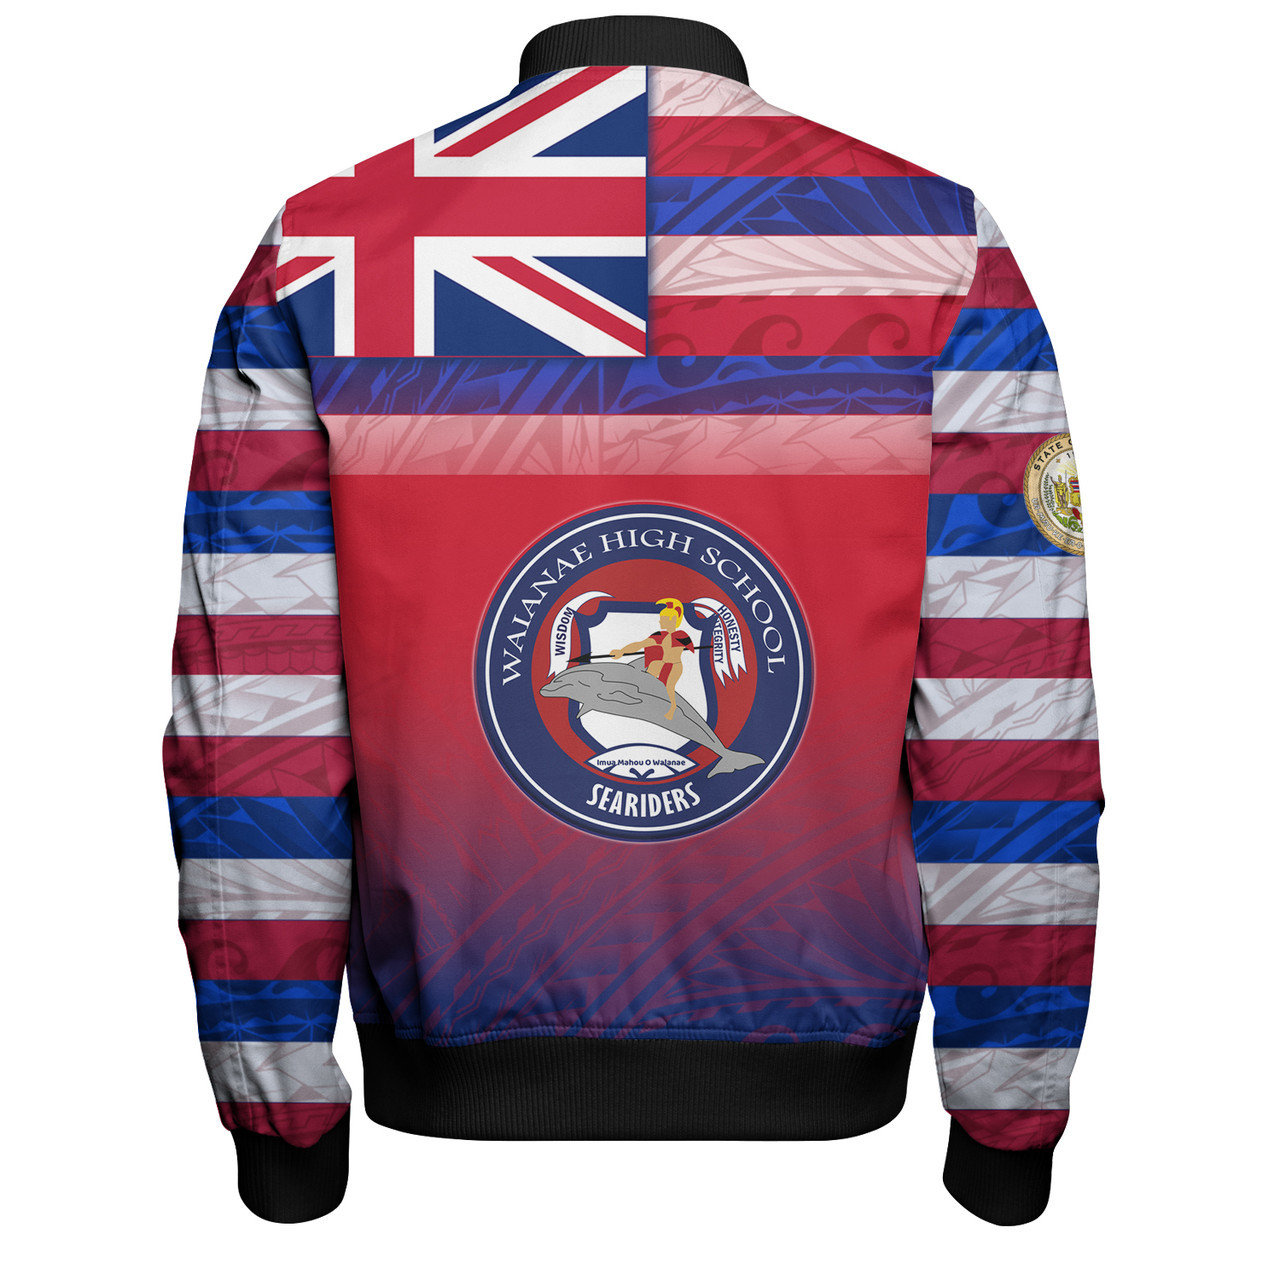 Hawaii Waialua High and Intermediate School Bomber Jacket Flag Color With Traditional Patterns